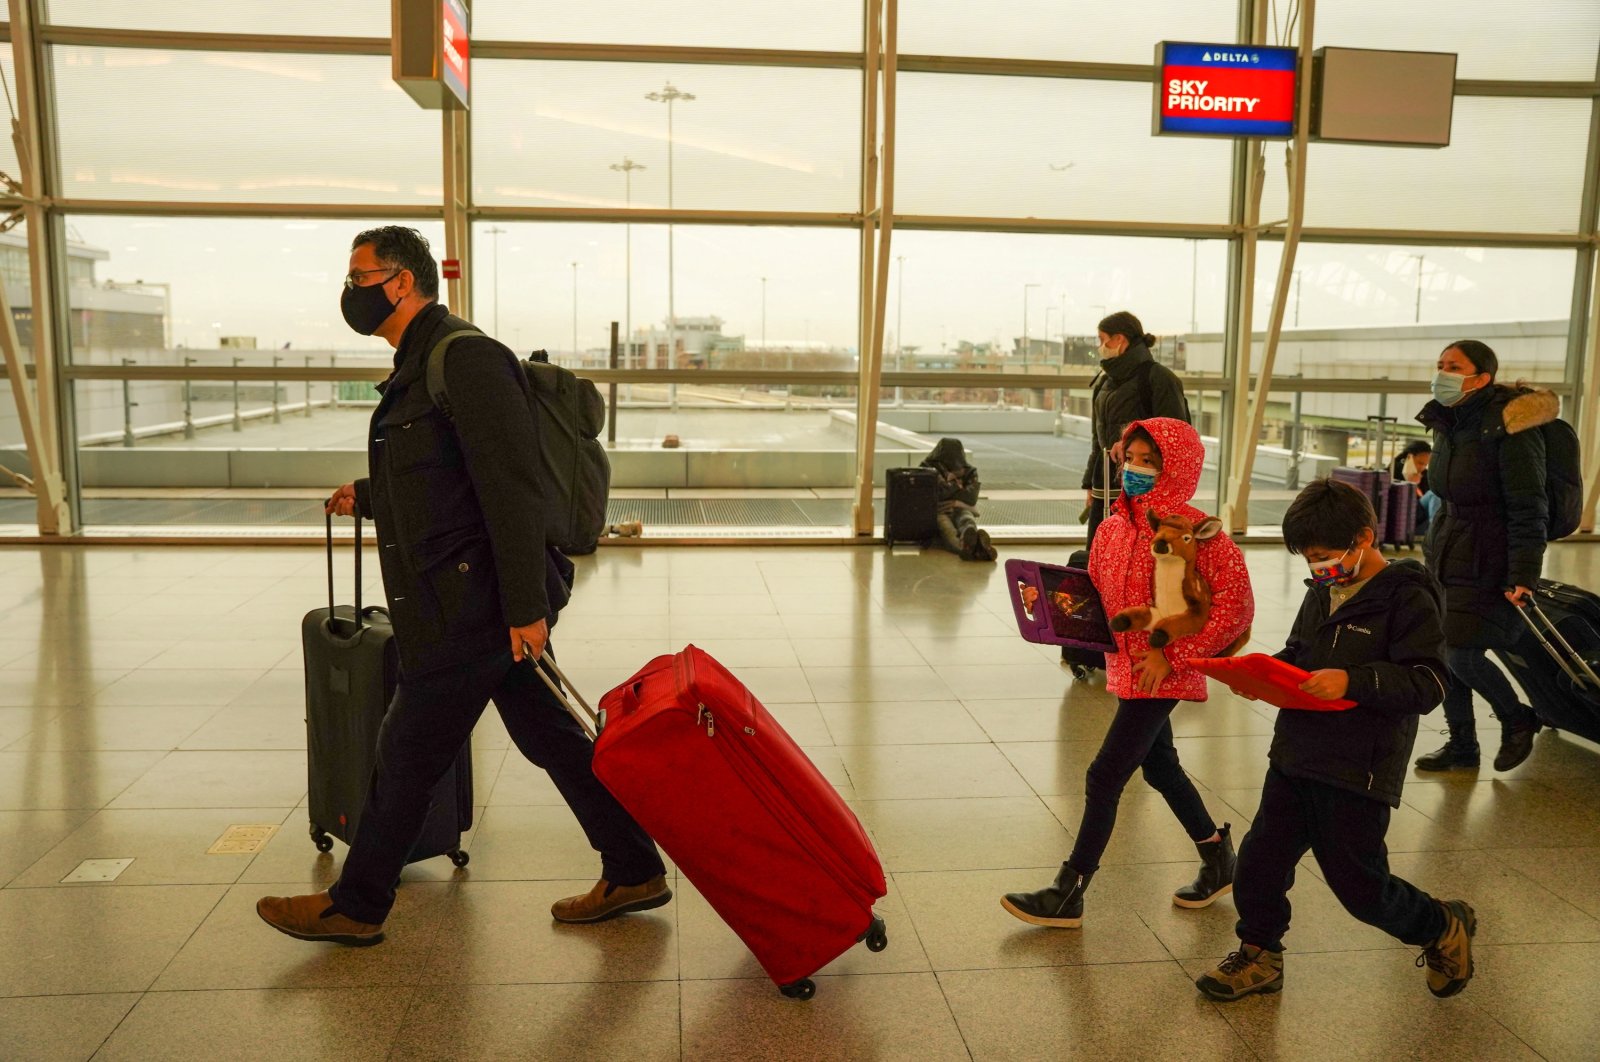 Passengers walk at the John F. Kennedy International Airport after airlines announced numerous flights were canceled due to the spread of the omicron coronavirus variant on Christmas Eve in Queens, New York City, U.S., Dec. 24, 2021. (Reuters Photo)